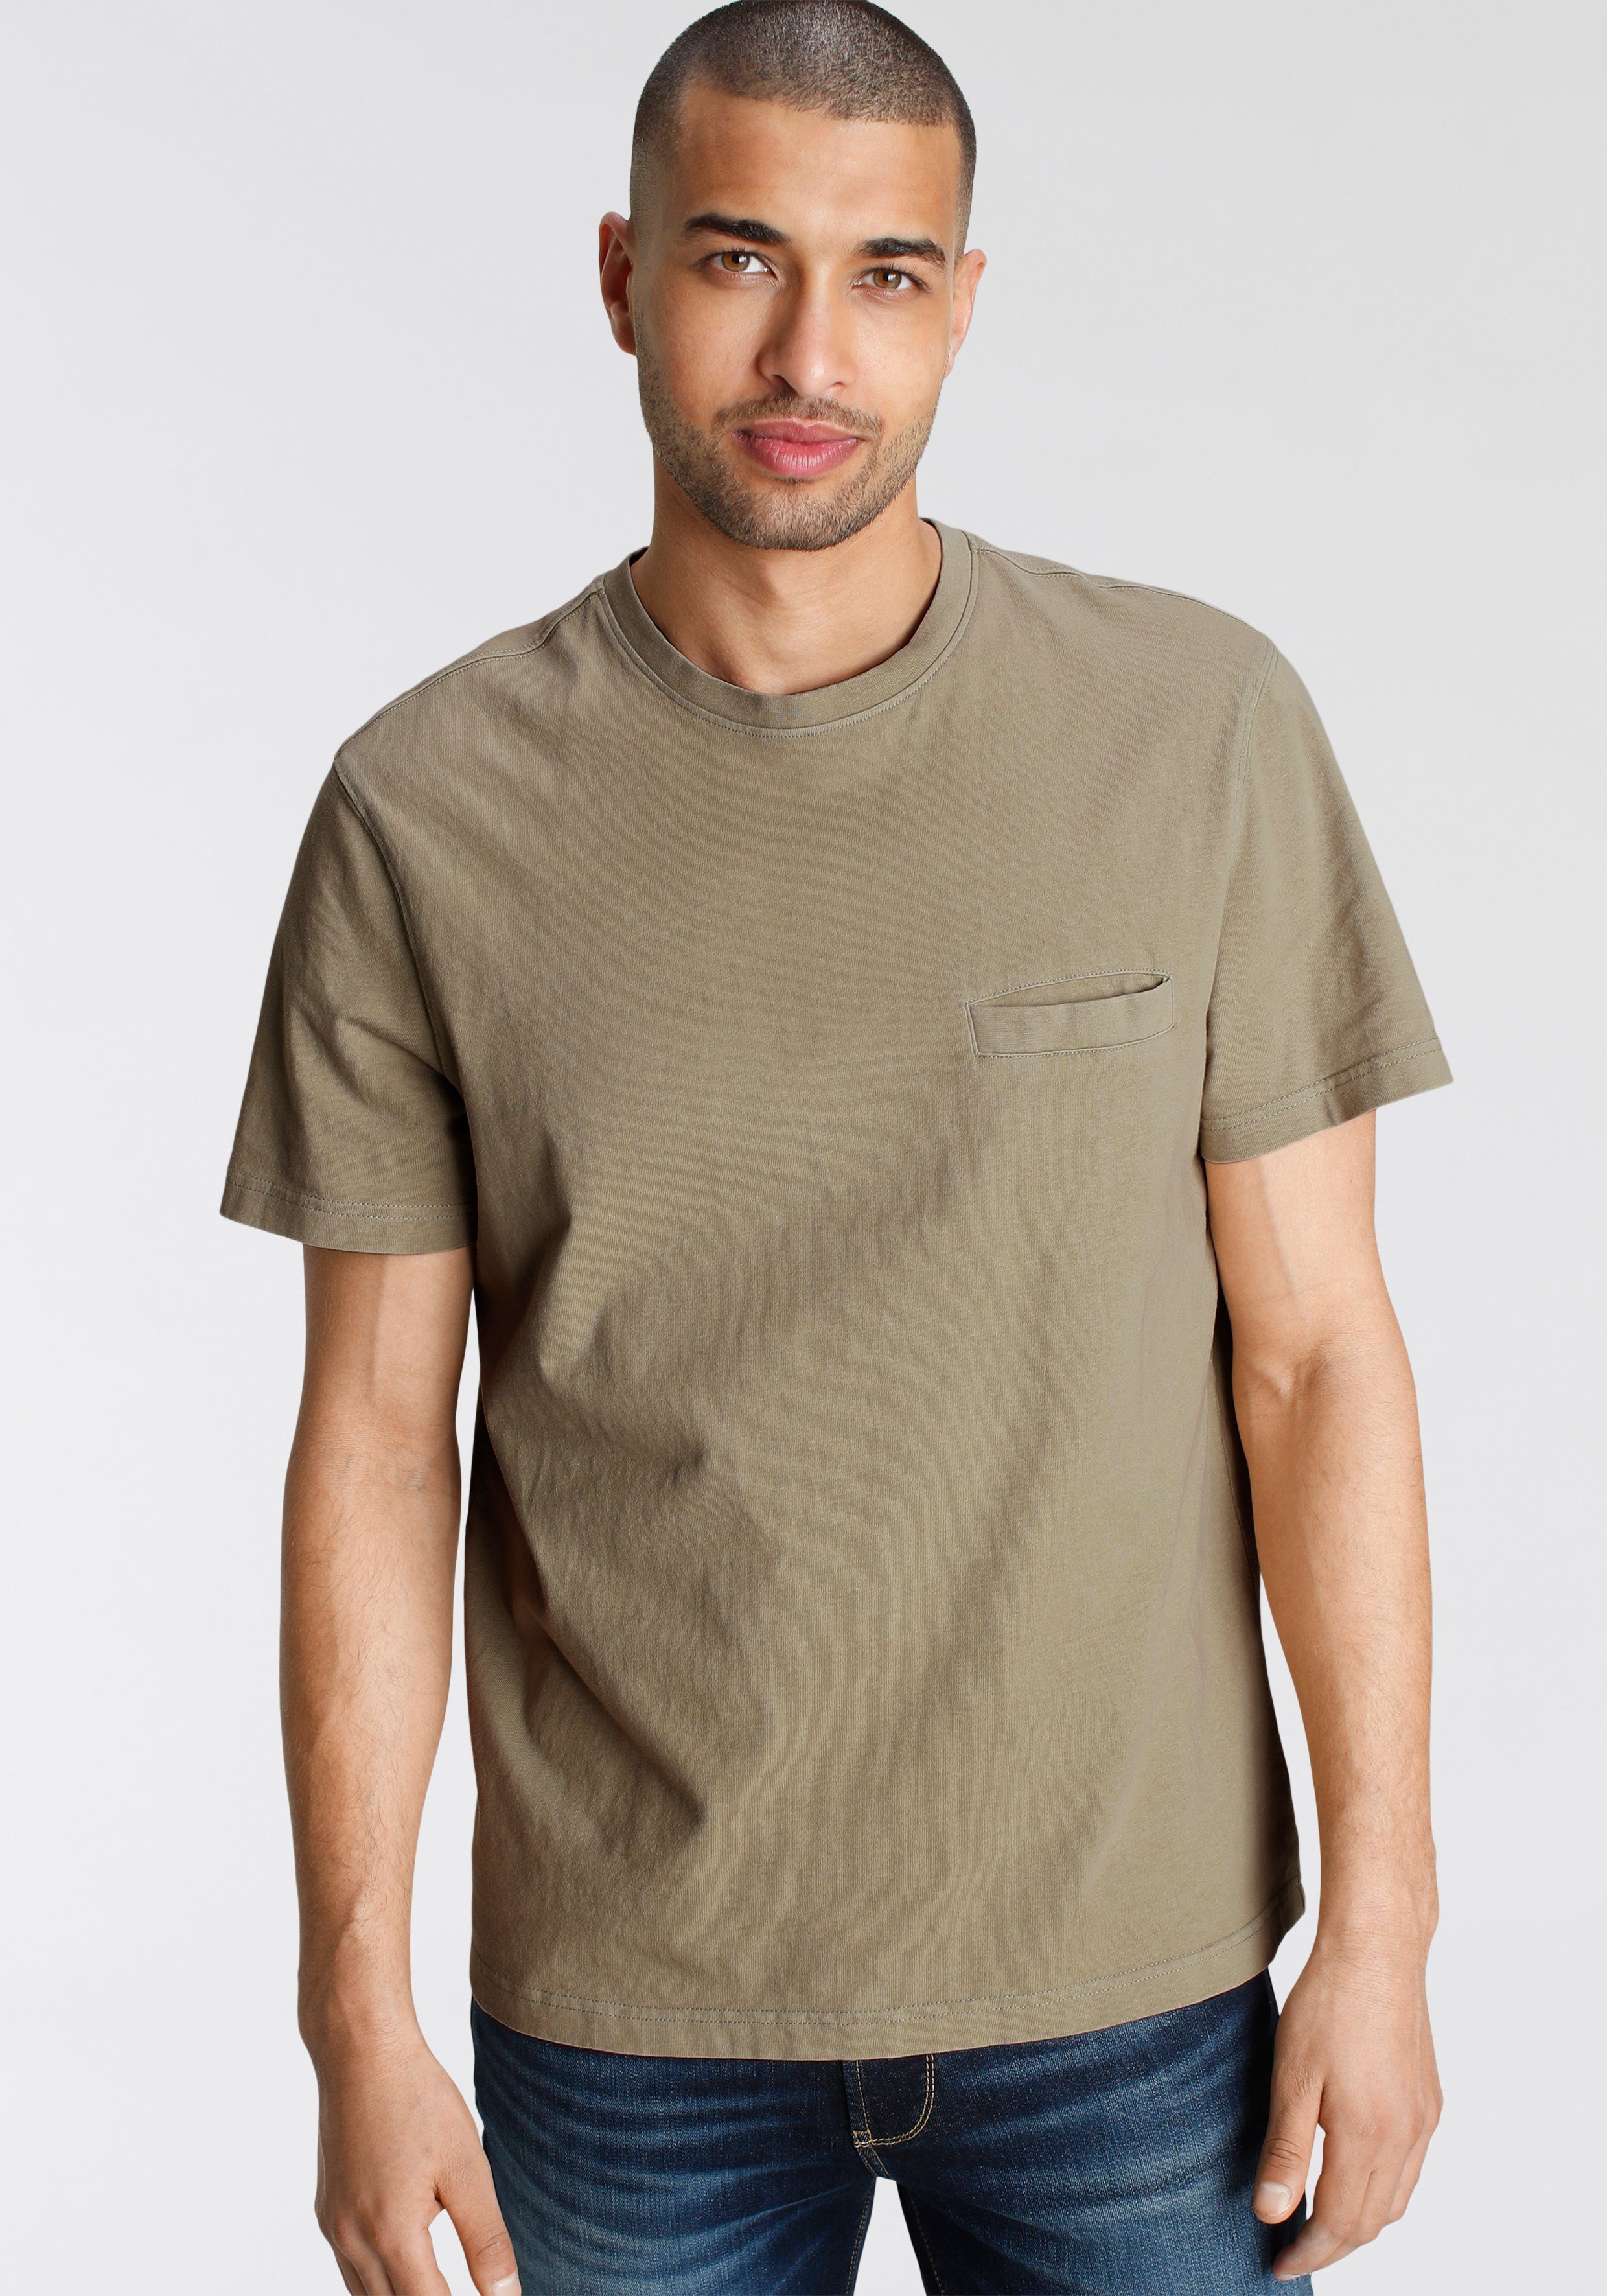 T-Shirt OTTO products oliv